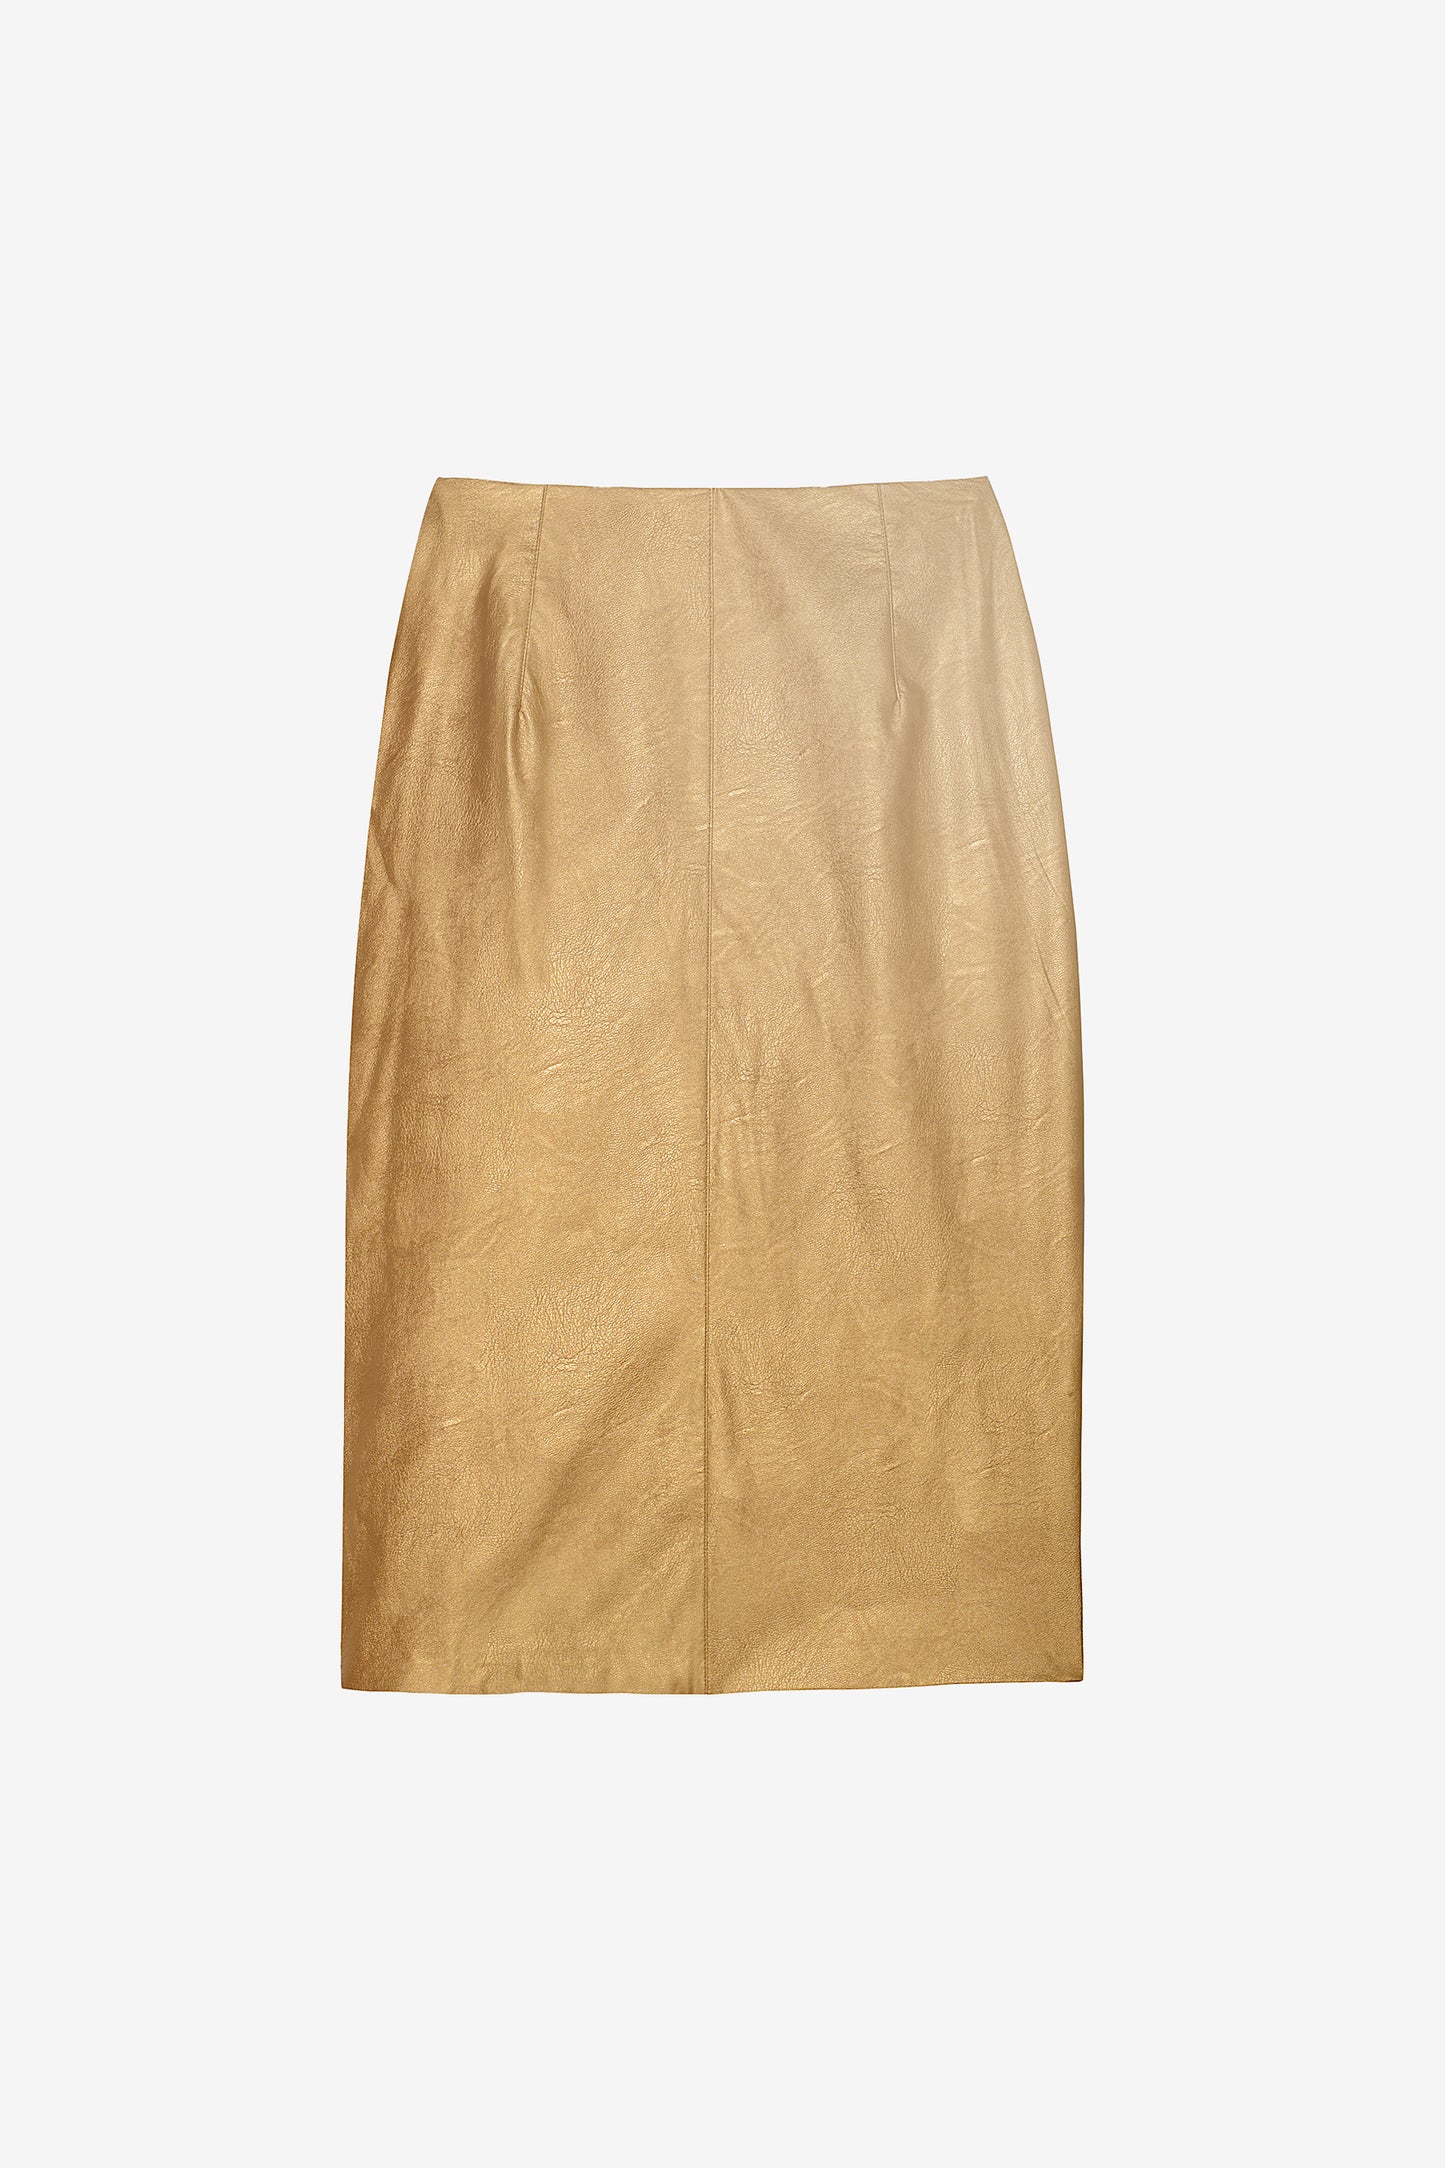 OLYMPE - Eccentric faux leather pencil skirt